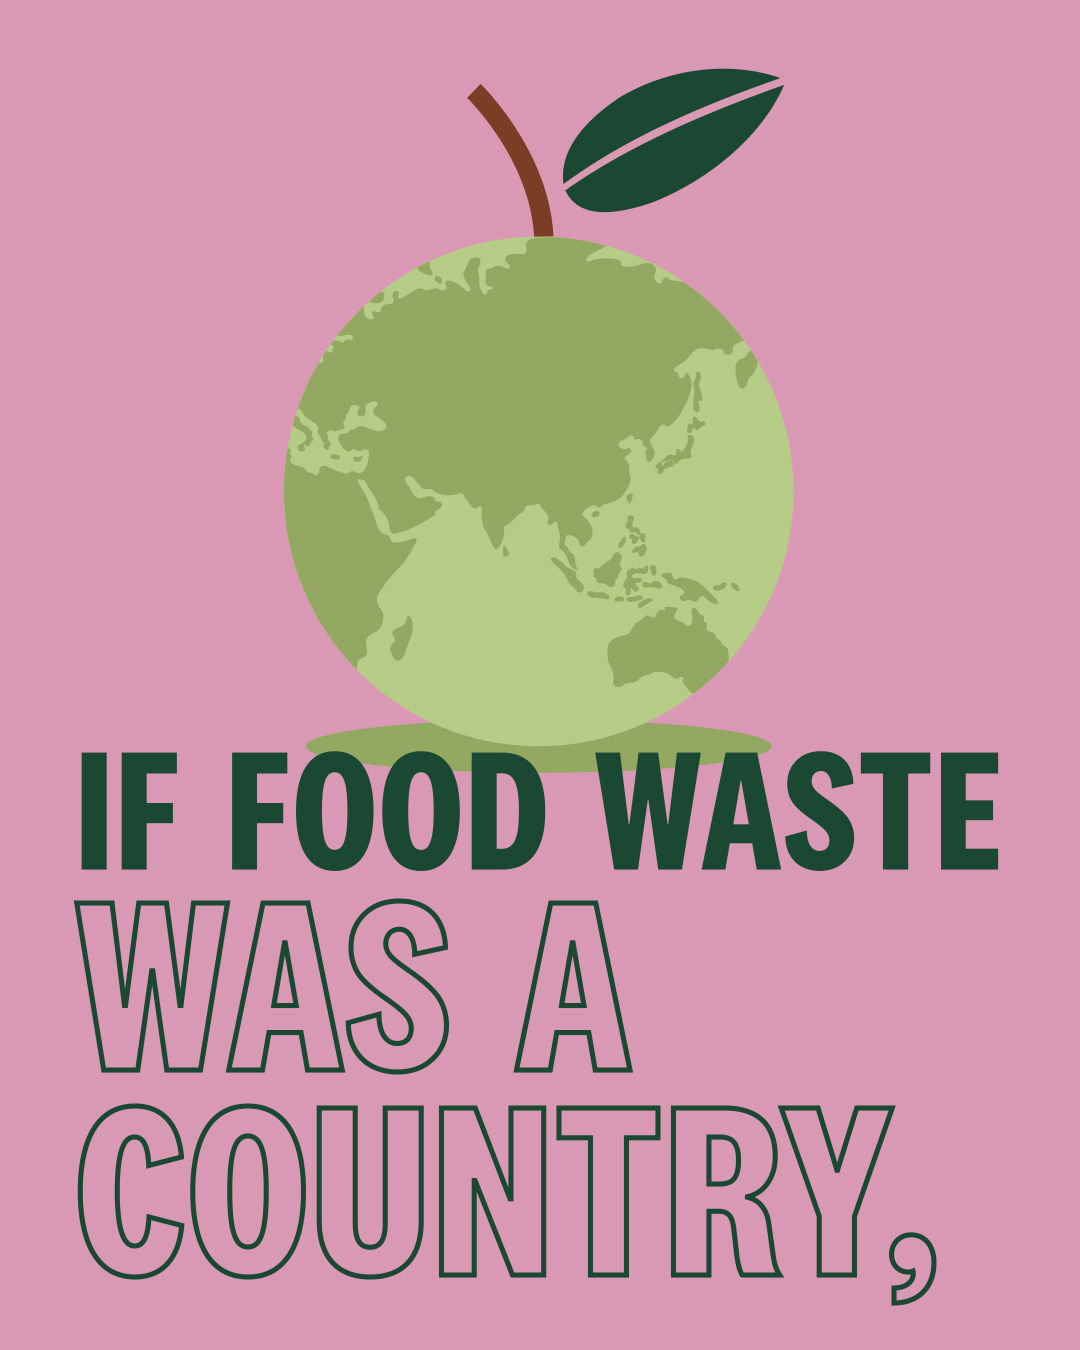 If food waste was a country, it would be the 3rd highest emitter of greenhouse gases. Half the weight in our bins is food waste. Let&#x27;s change that.